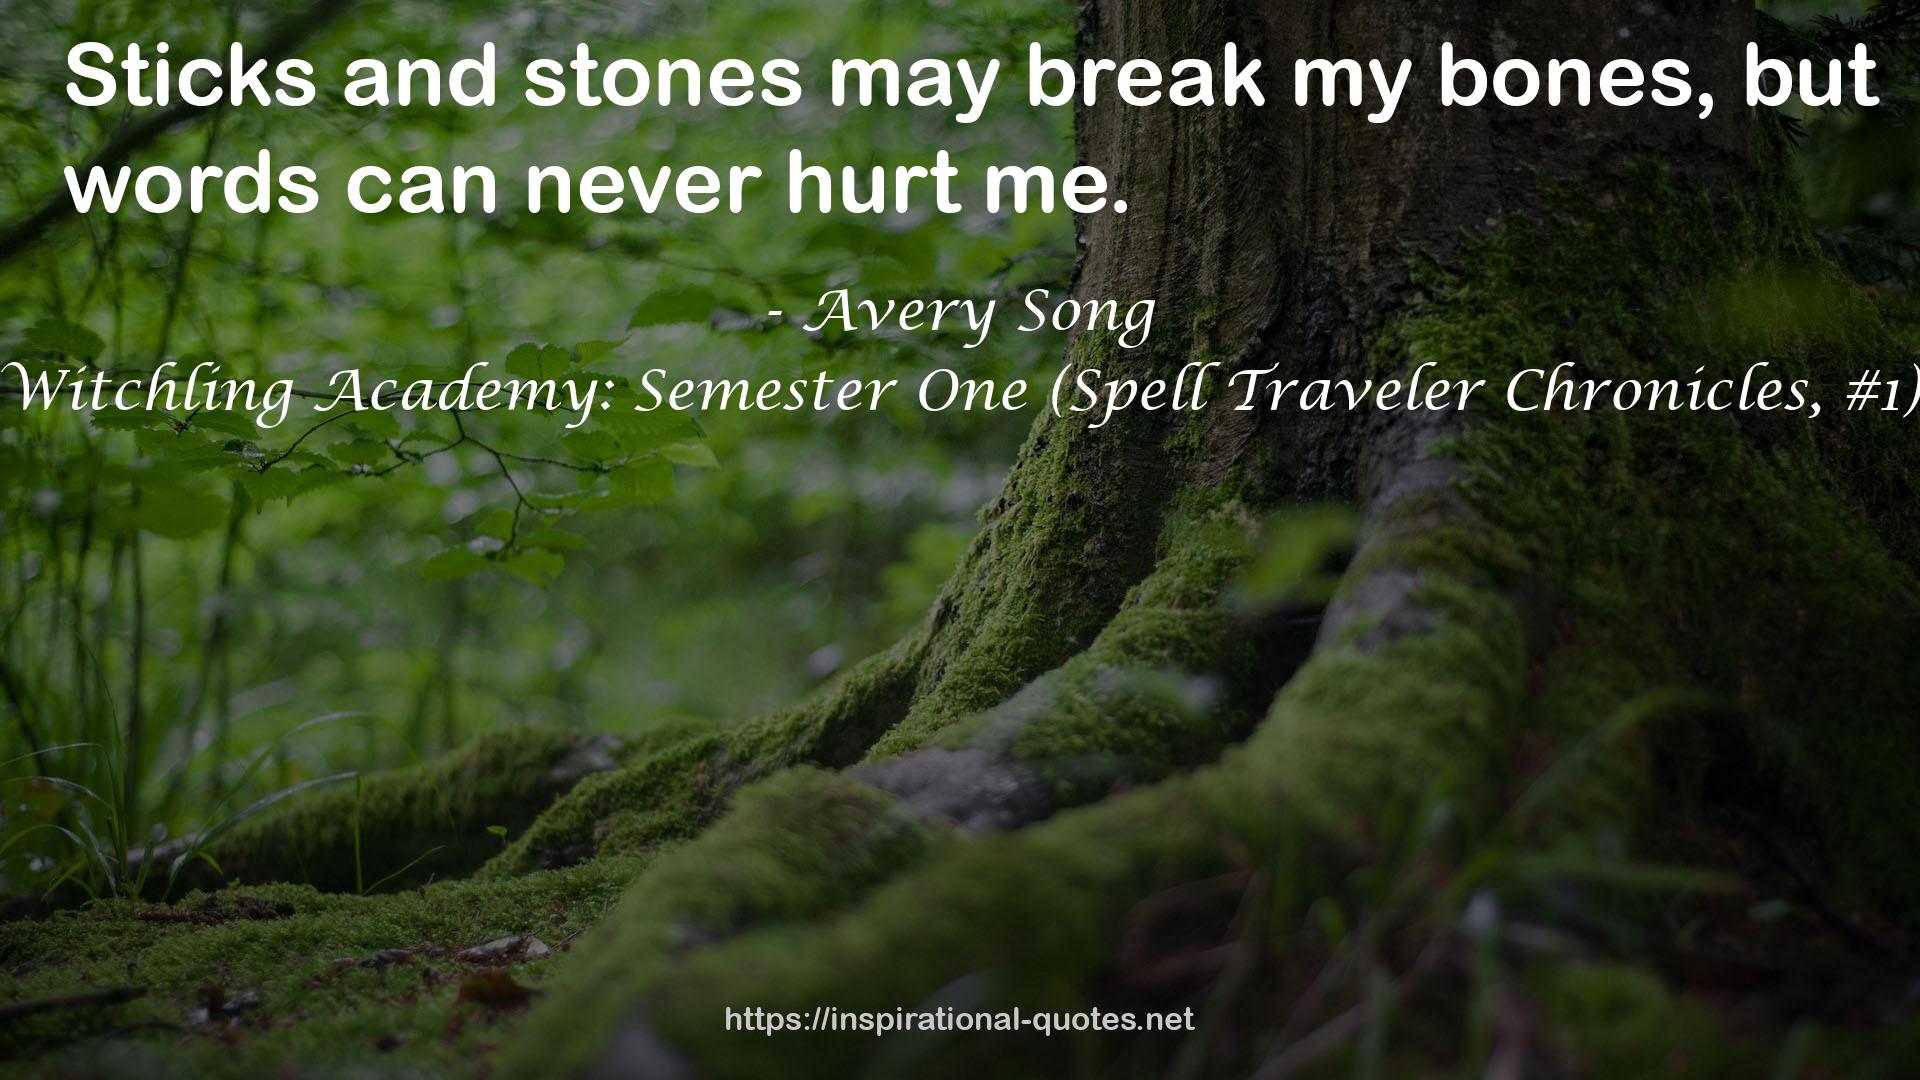 Witchling Academy: Semester One (Spell Traveler Chronicles, #1) QUOTES